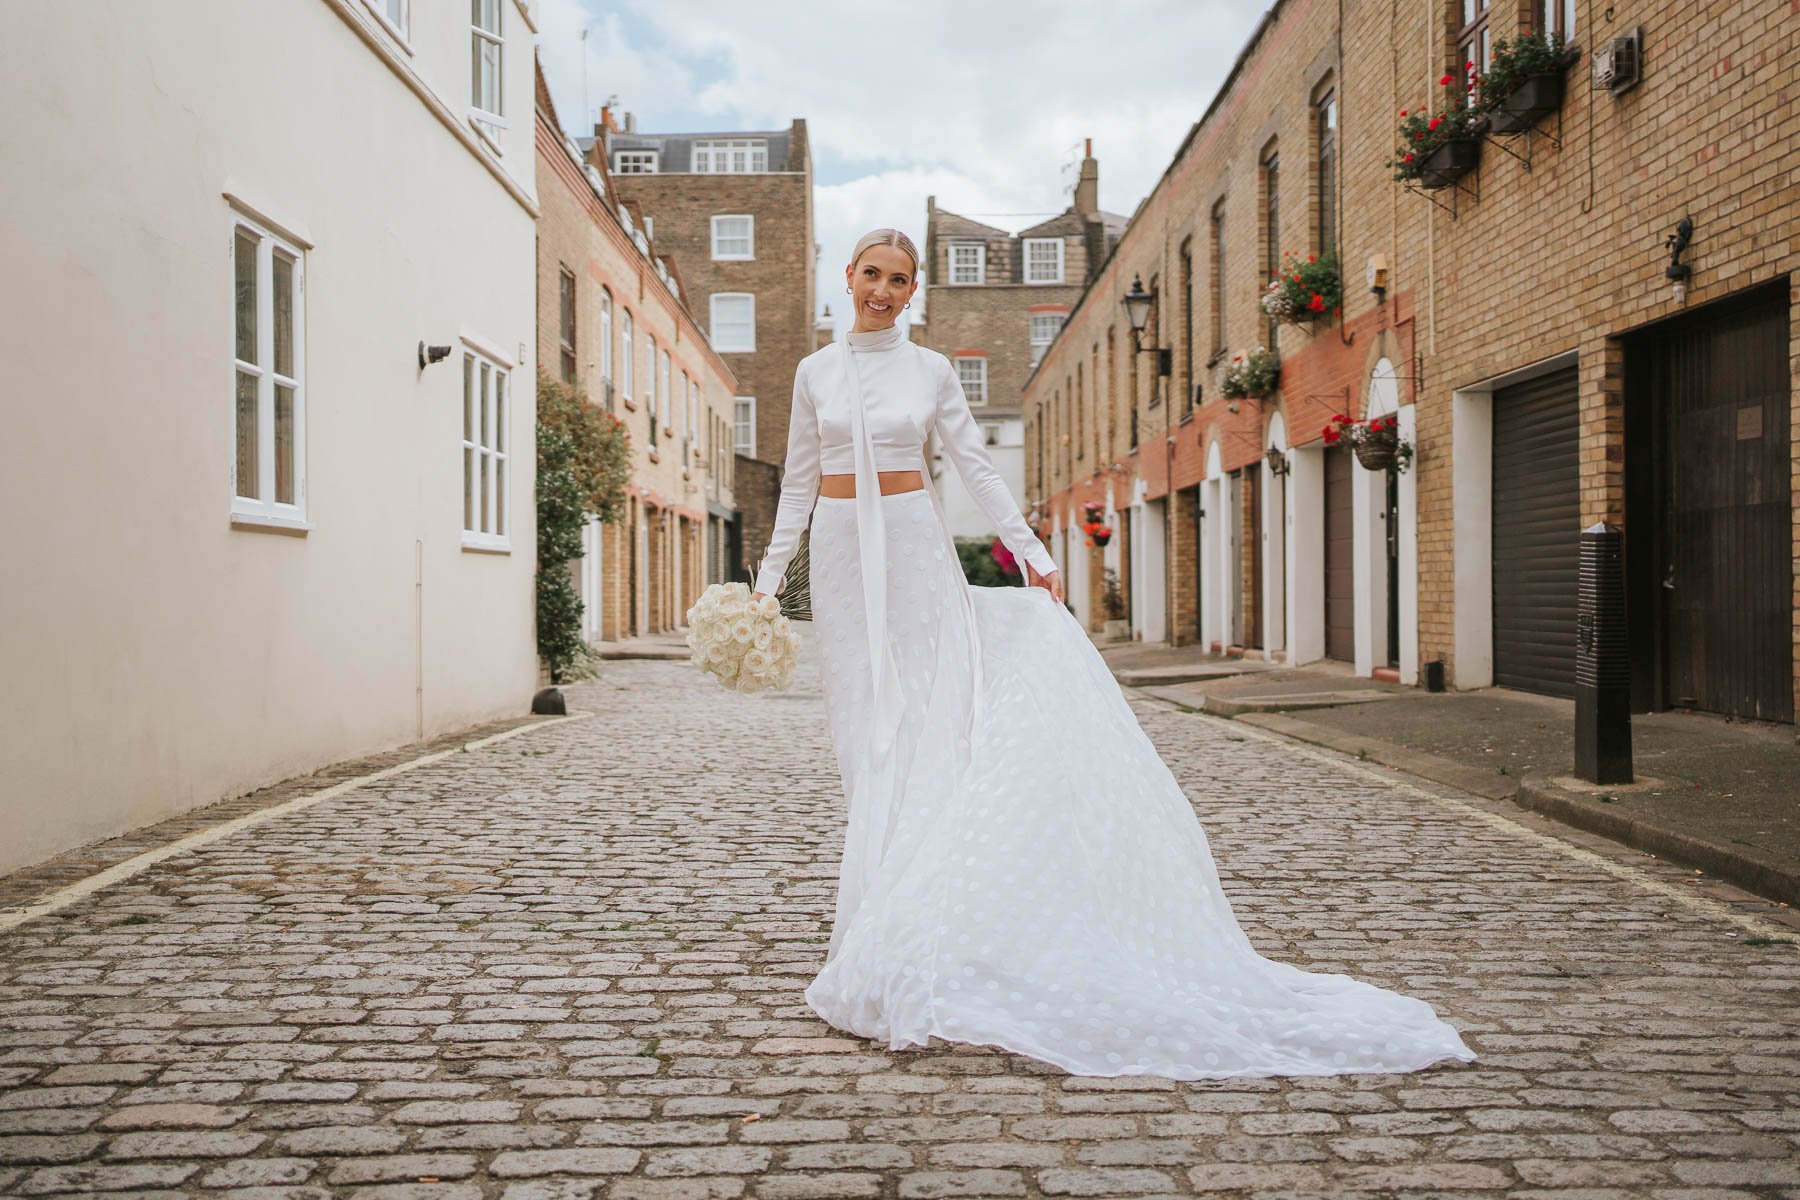  Bride poses with flowing wedding dress in middle of cobbled street behind Marylebone Town Hall. 